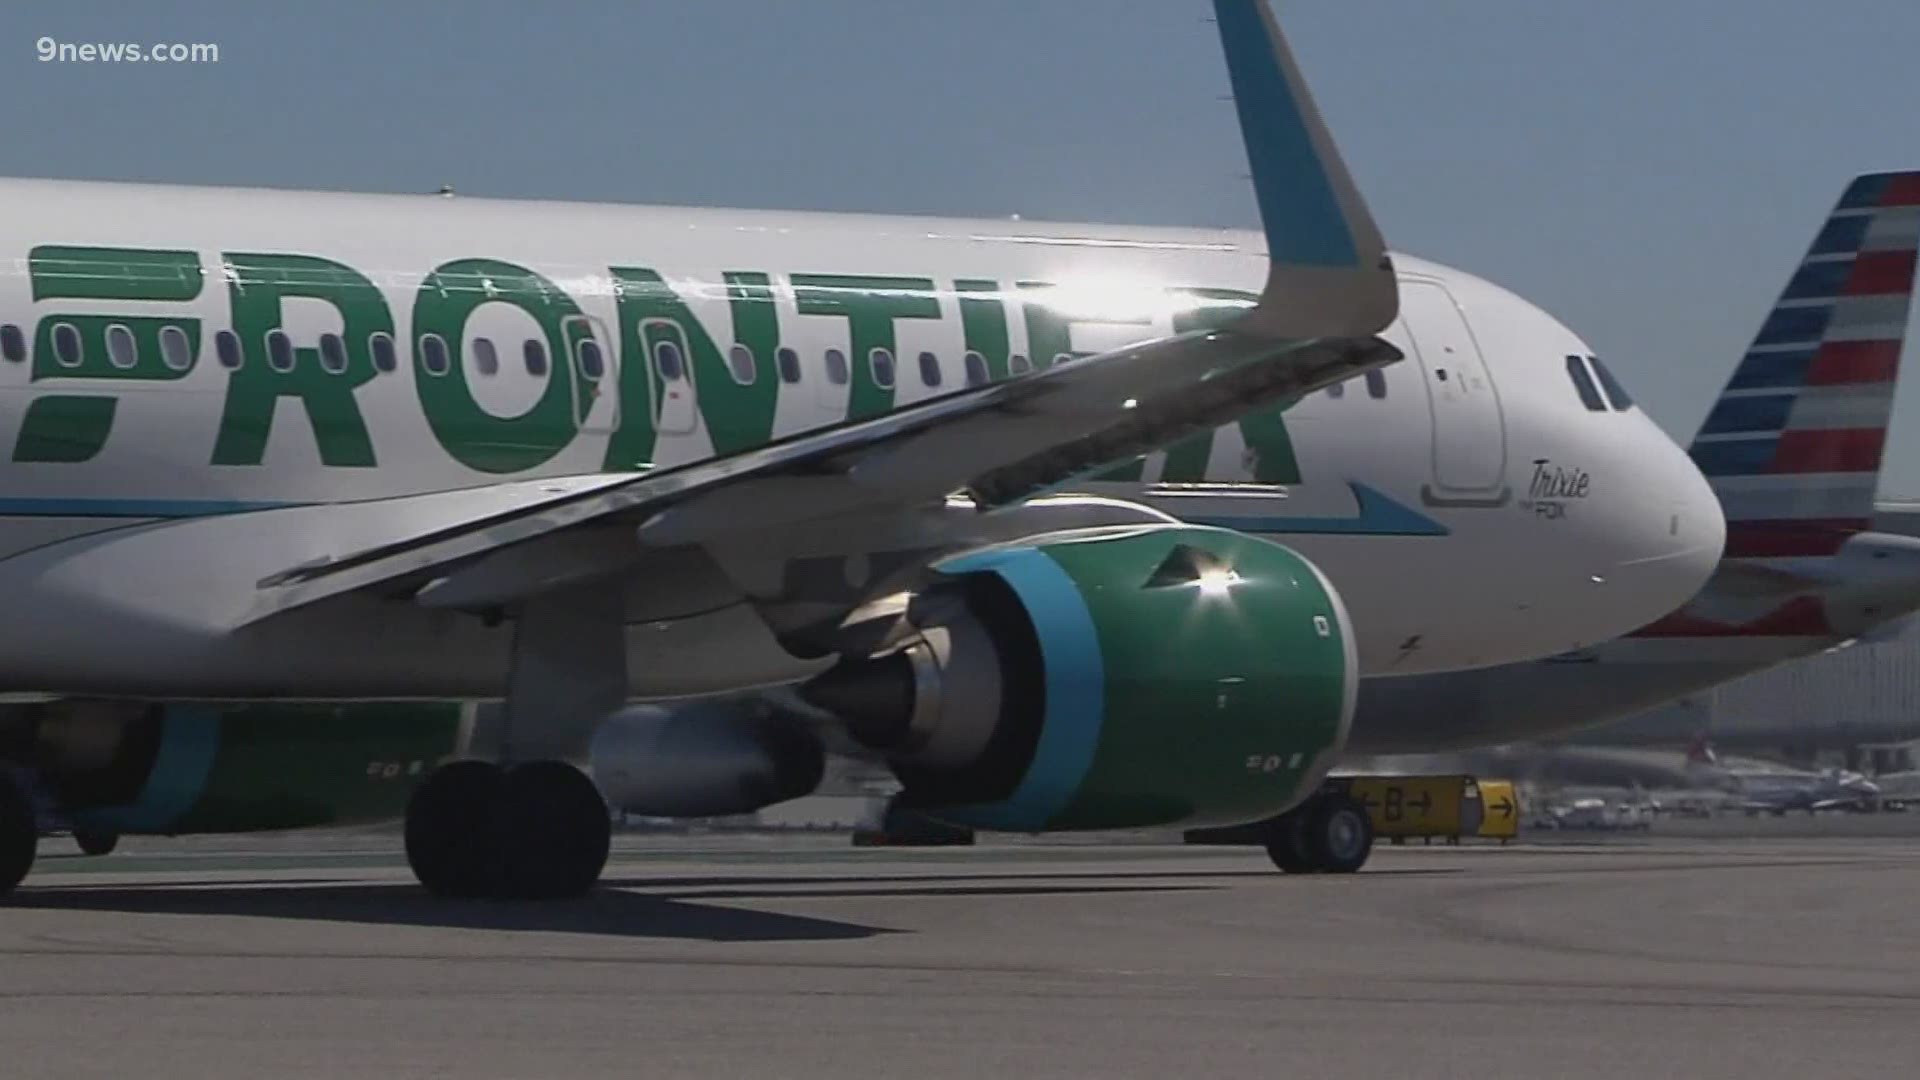 Legal expert Whitney Traylor examines a request for federal help from Colorado's AG after he got hundreds of complaints about Frontier Airlines' business practices.